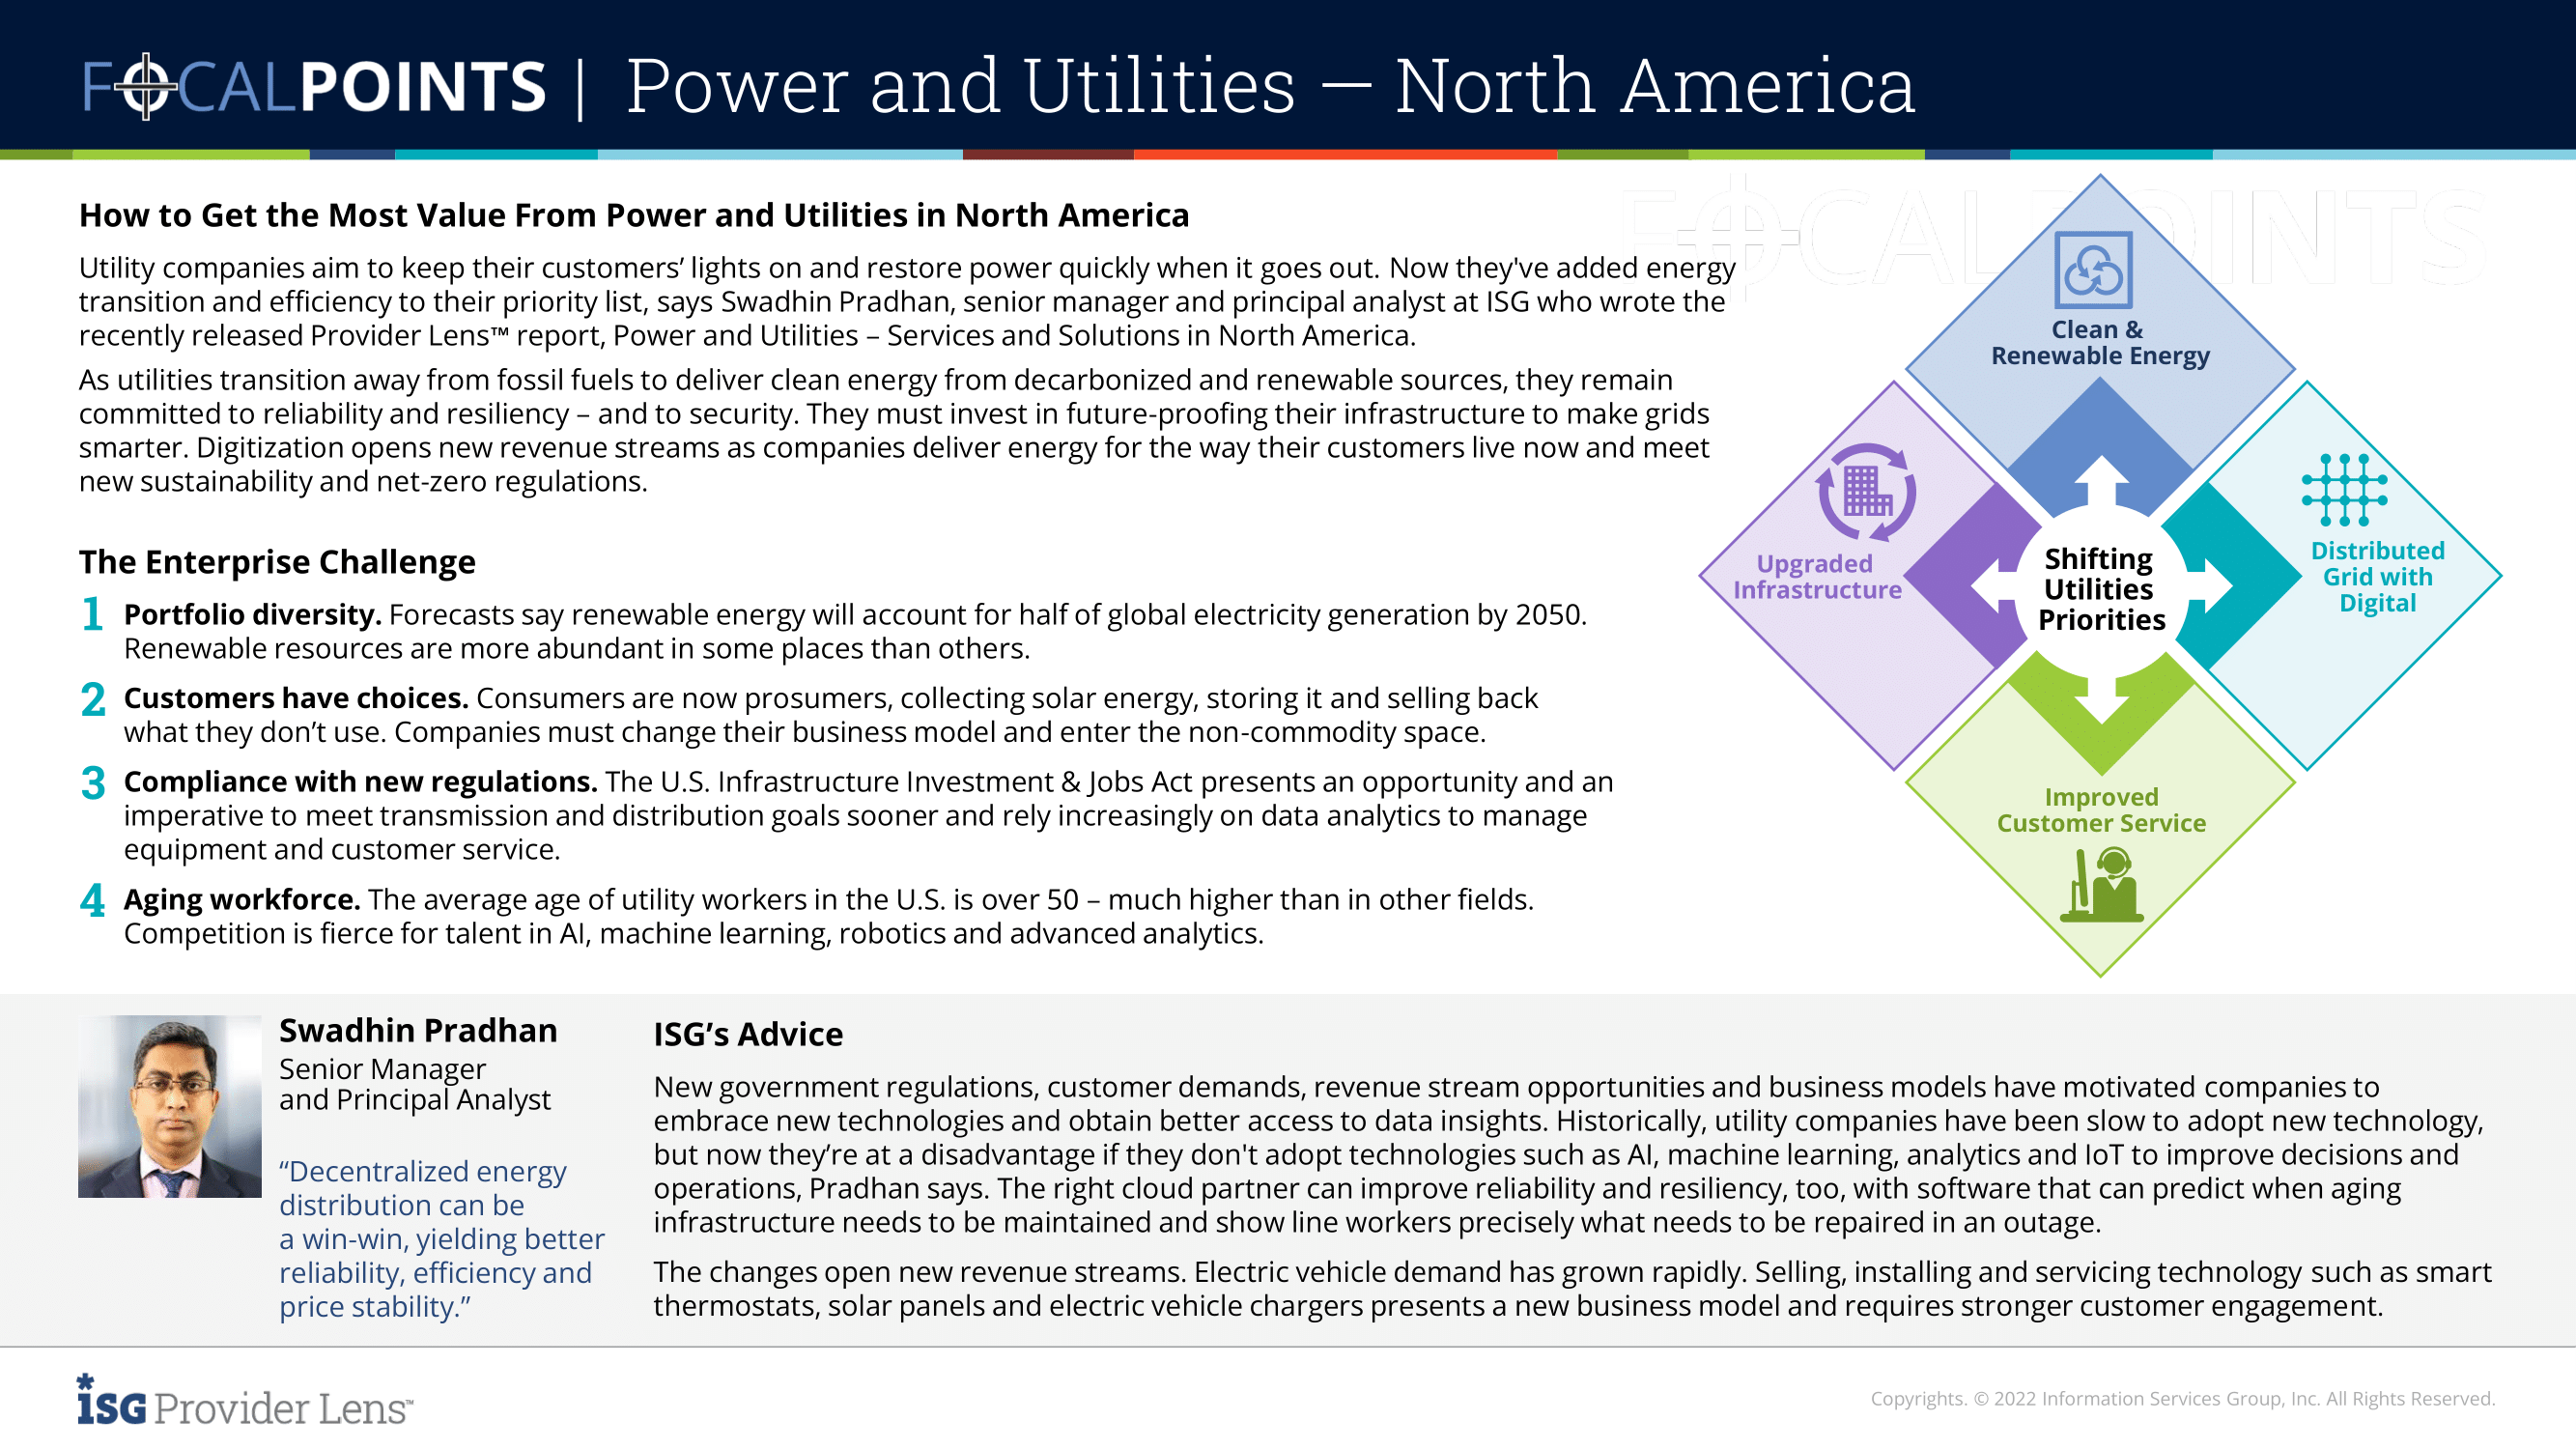 ISG Focal Points 2022 - Power and Utilities - North America - SP 2022-09-23 v1-1